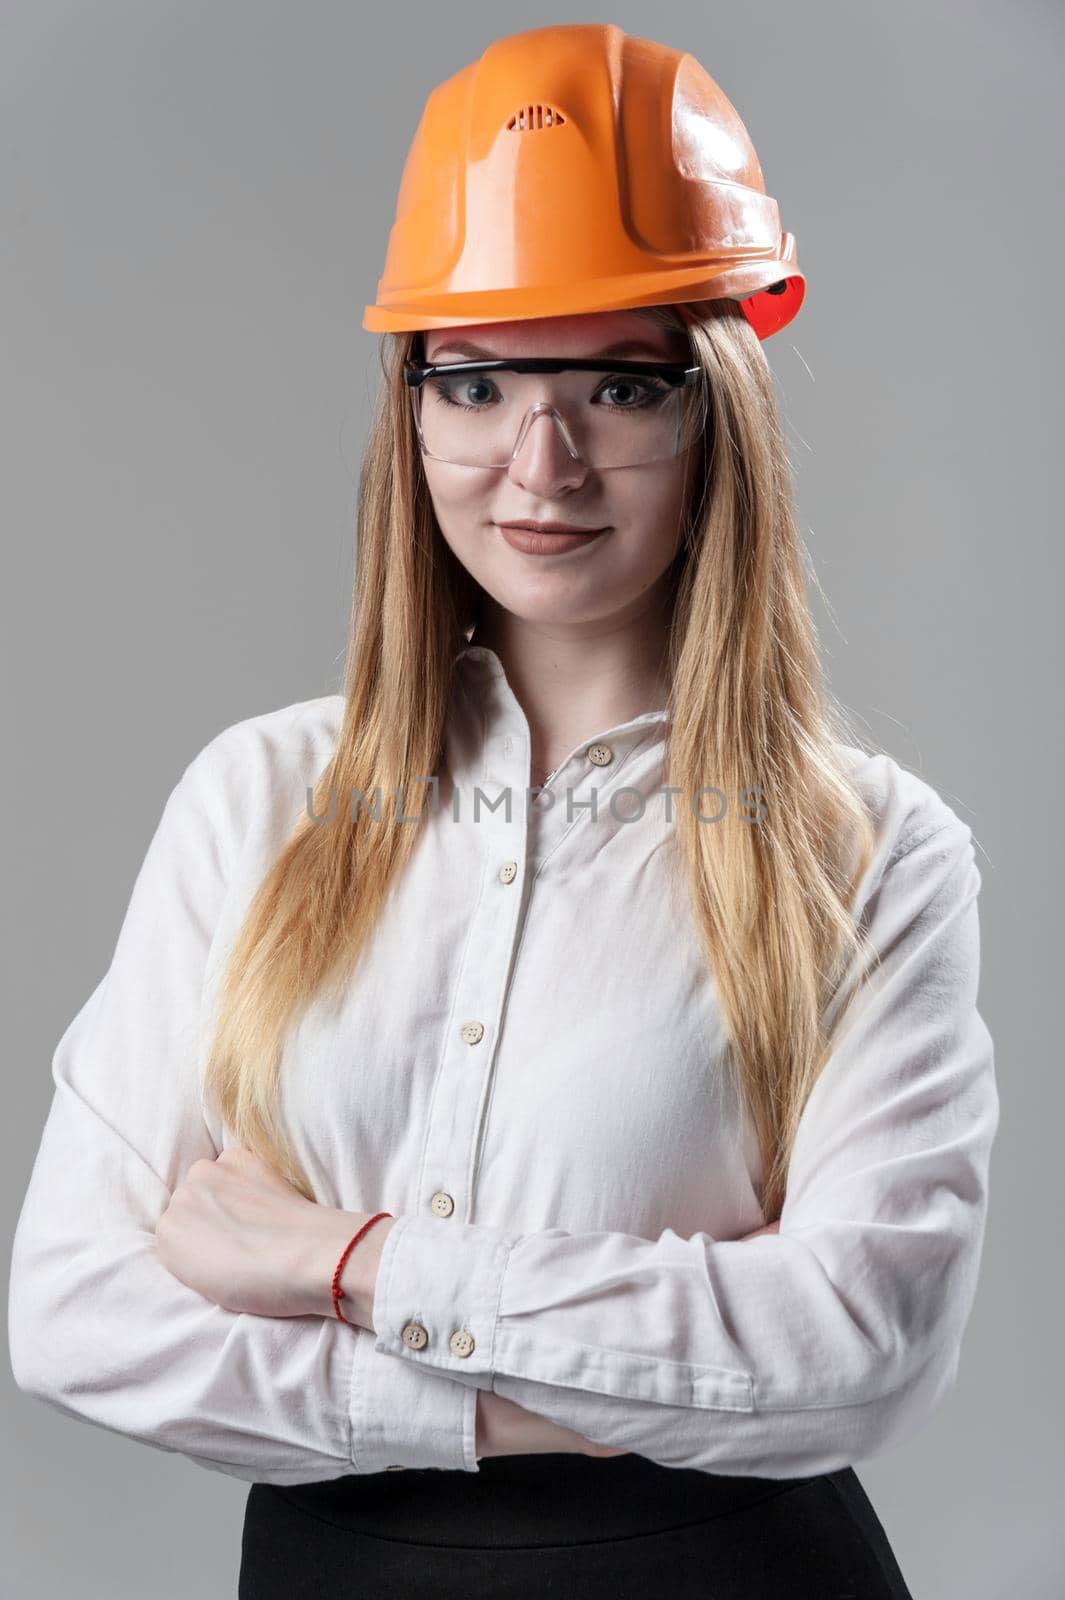 Portrait of a young attractive woman with blond hair in orange helmet and glasses on a neutral gray background.